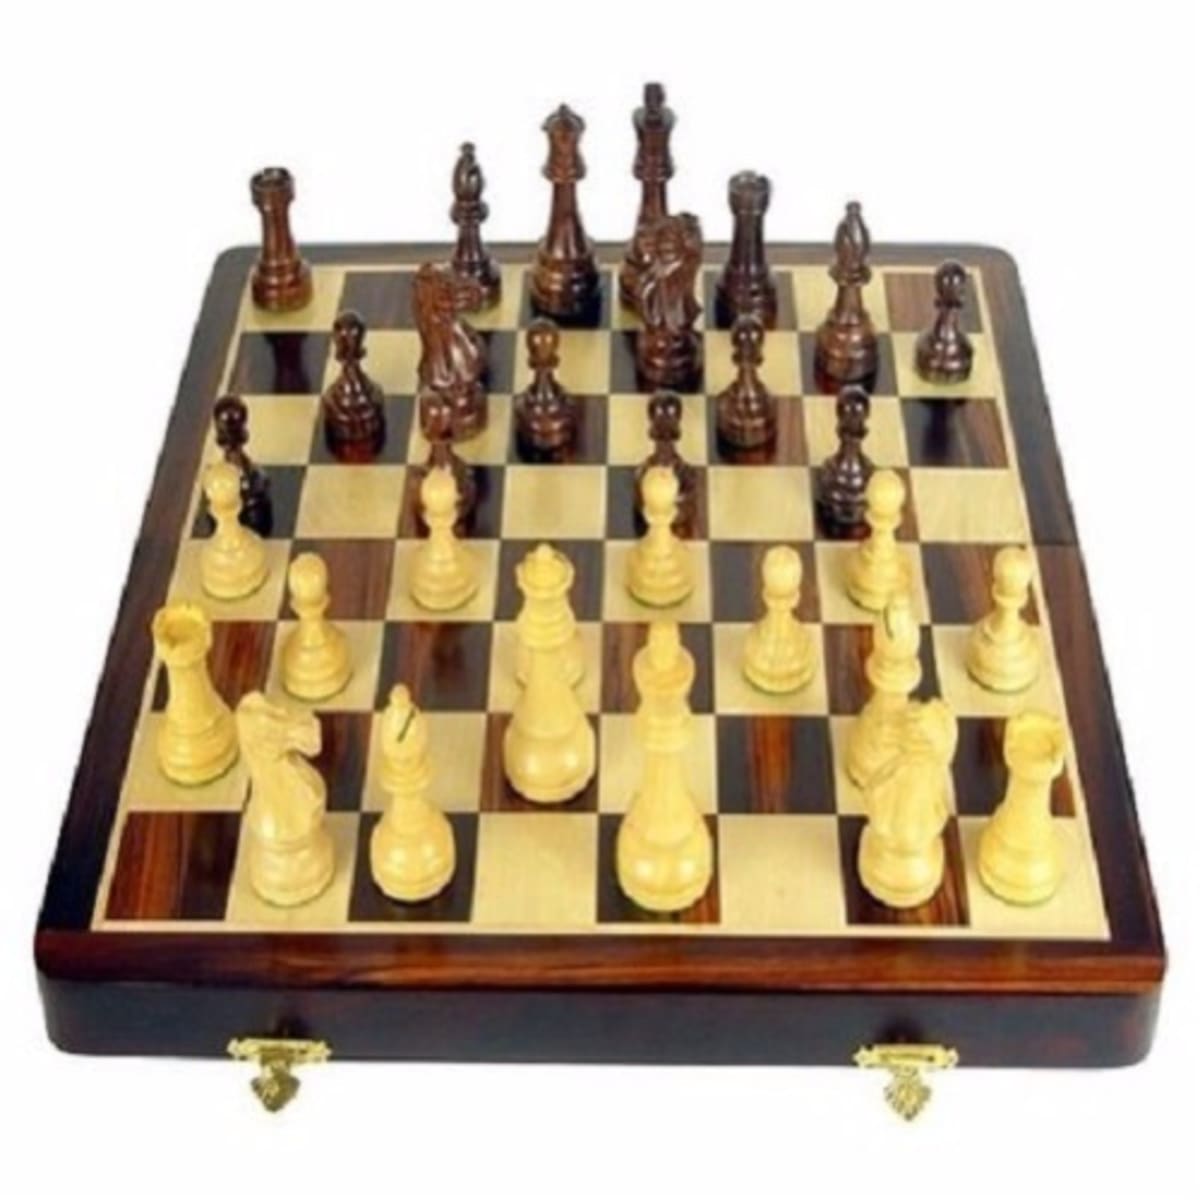 CAPS Conversions - Chess Forums 